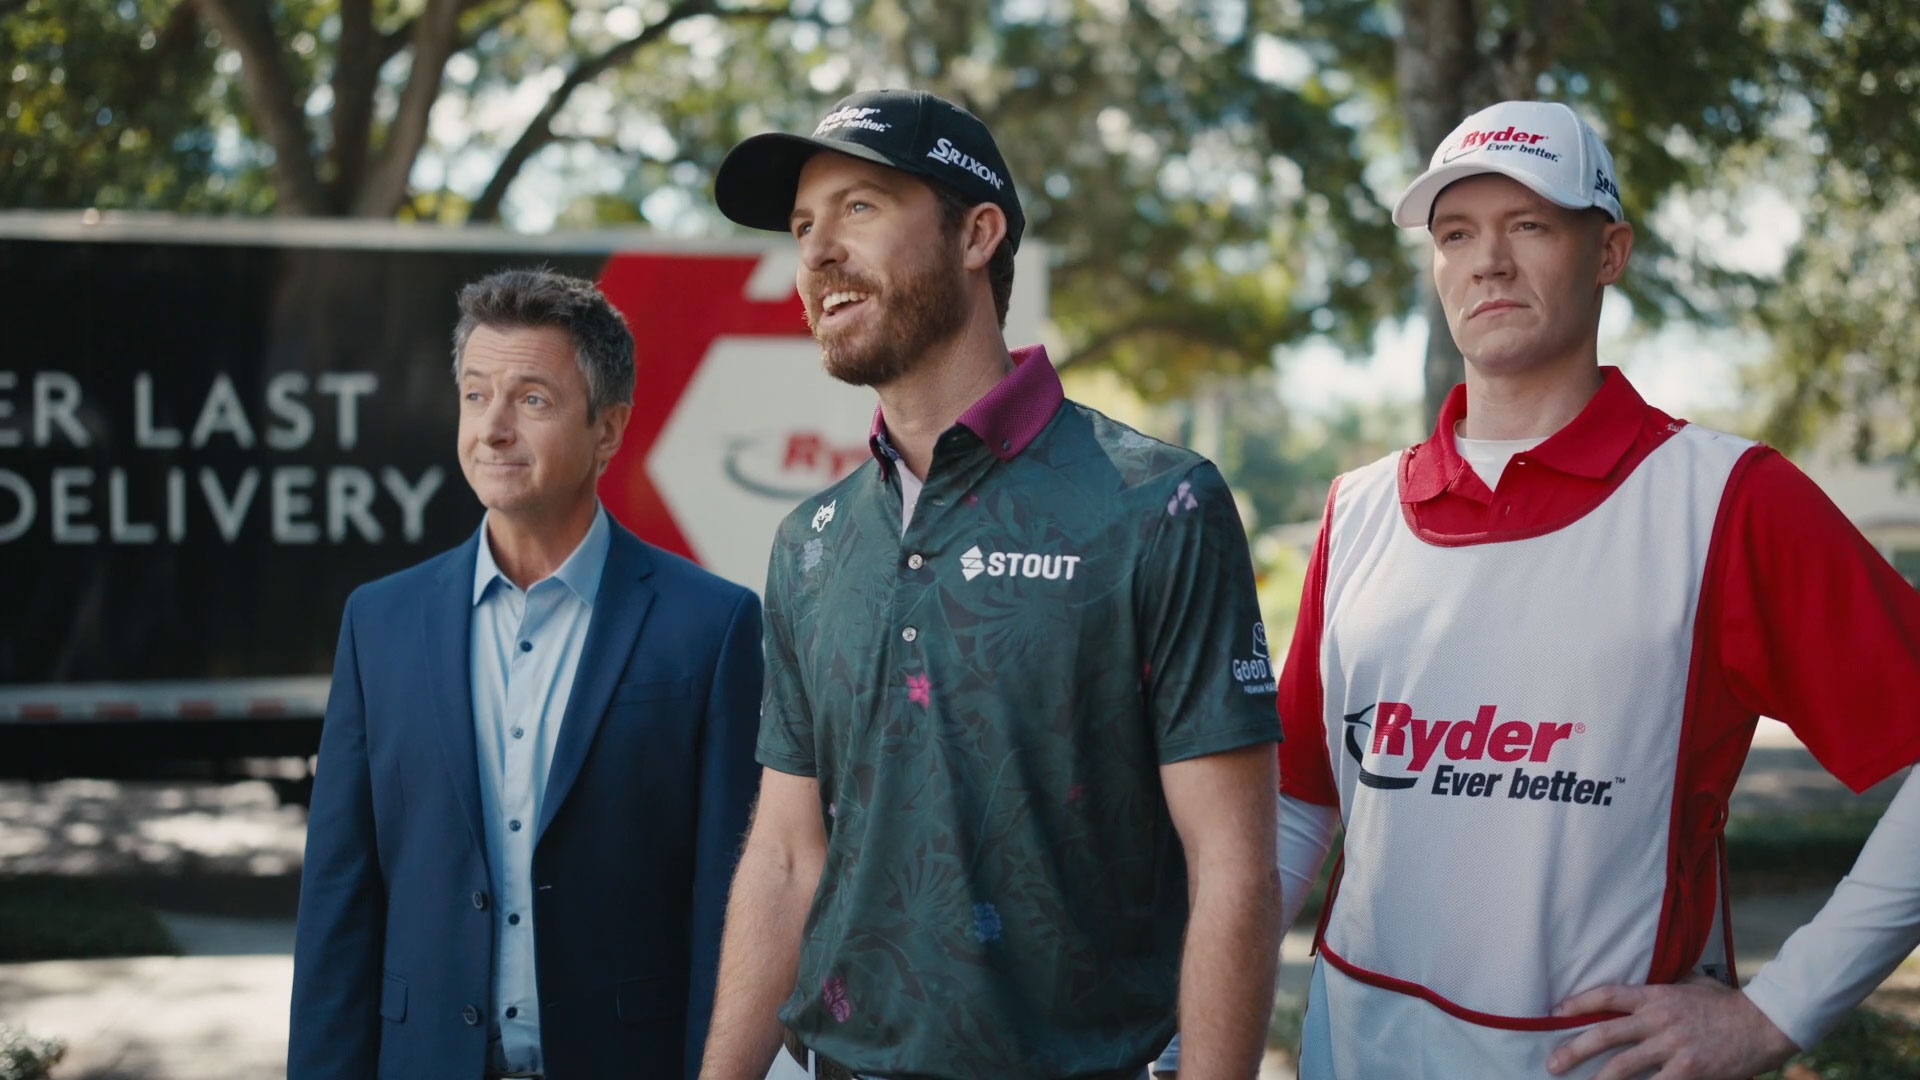 The “Driver Caddie” commercial features professional golfer Sam Ryder pitching his agent the idea of providing caddies for Ryder Last Mile deliveries to help navigate obstacles from curb to door.